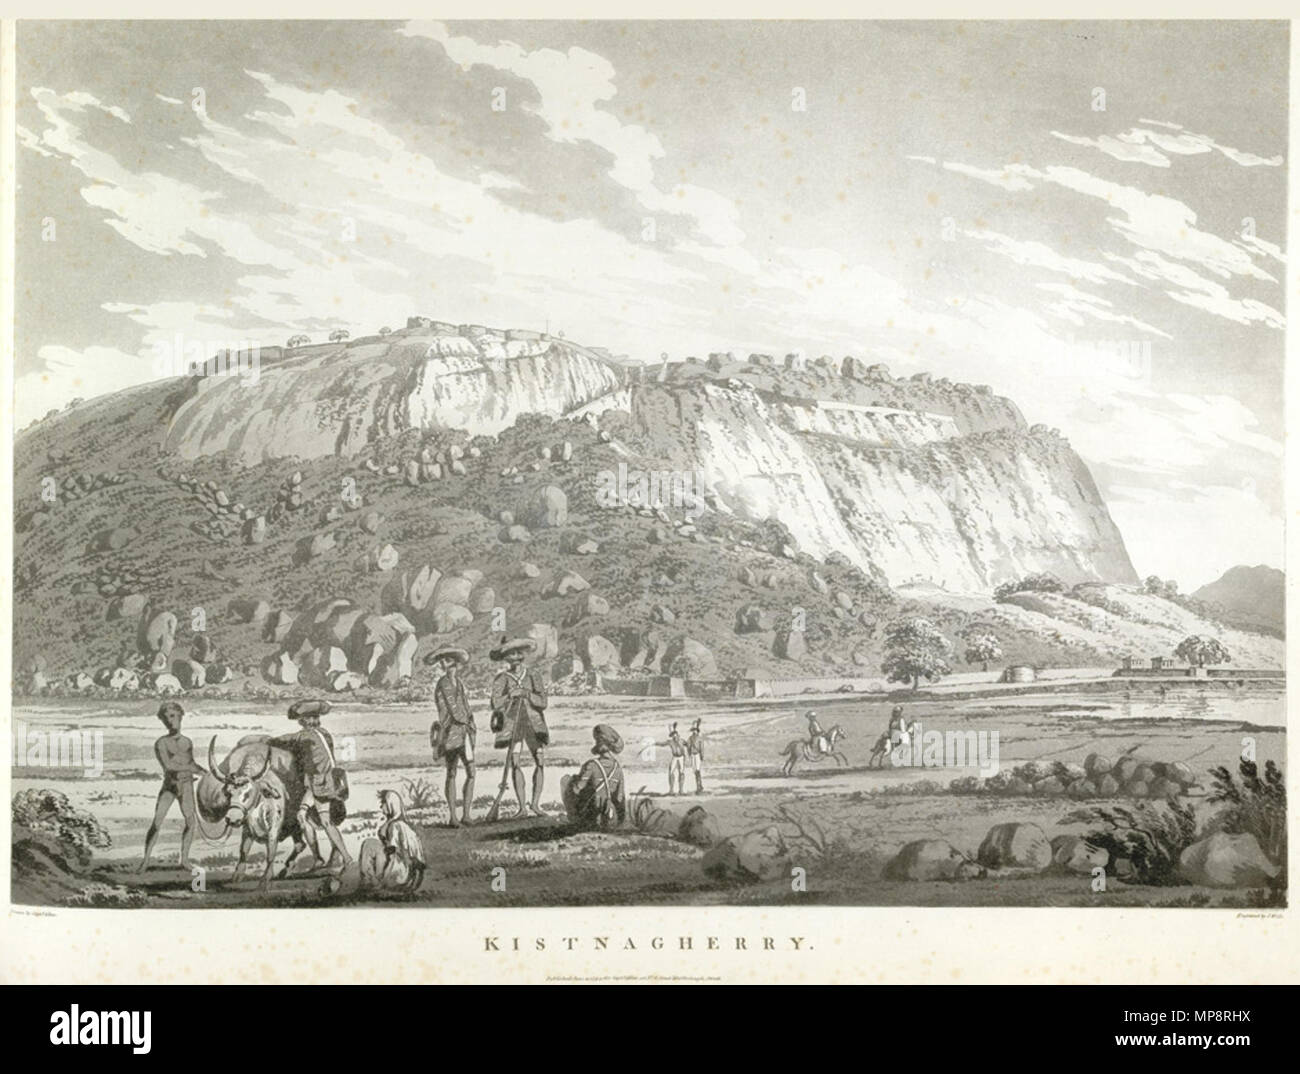 .  English: This uncoloured aquatint is taken from plate 20 of Captain Alexander Allan's 'Views in the Mysore Country'. Krishnagiri is a town in the Krishnagiri district of Tamil Nadu, bordering Karnataka. It is distinguished by the ruins of a building set magnificently atop towering granite boulders. The artist tells us that this was 'a hill fort of great strength and local importance; and was for a short time in possession of the English in the war of 1768 with Hyder Ali, when it surrendered after a long blockade'. British troops under Lt Col Maxwell attacked it in November 1791, during the  Stock Photo